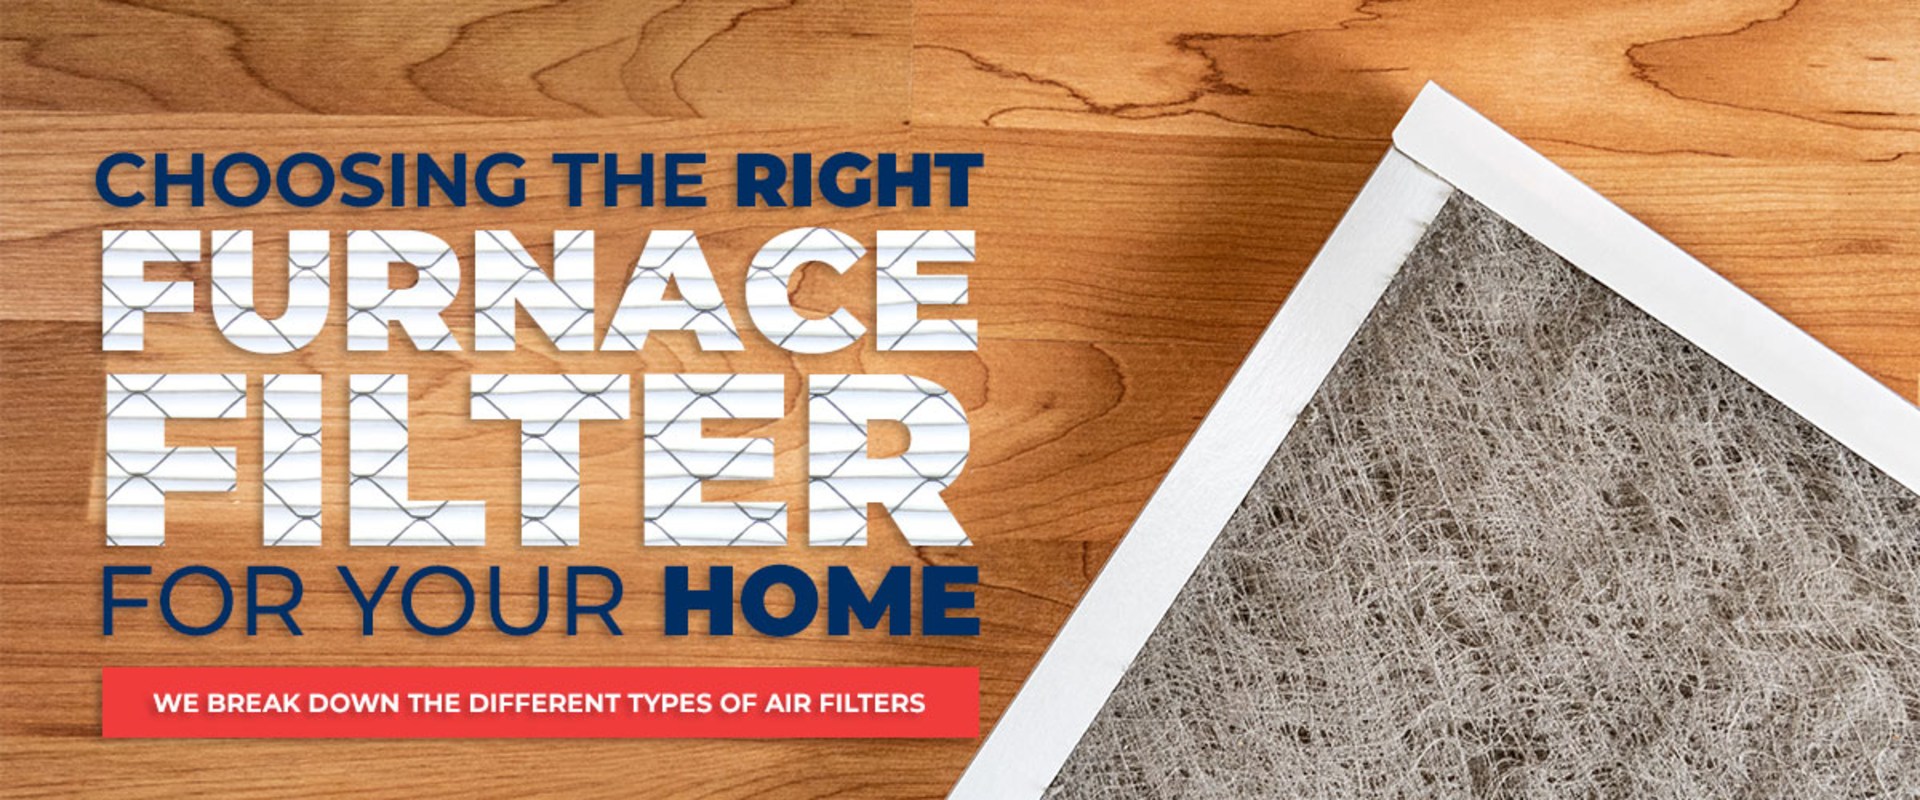 Choosing the Right Filter for Your Furnace